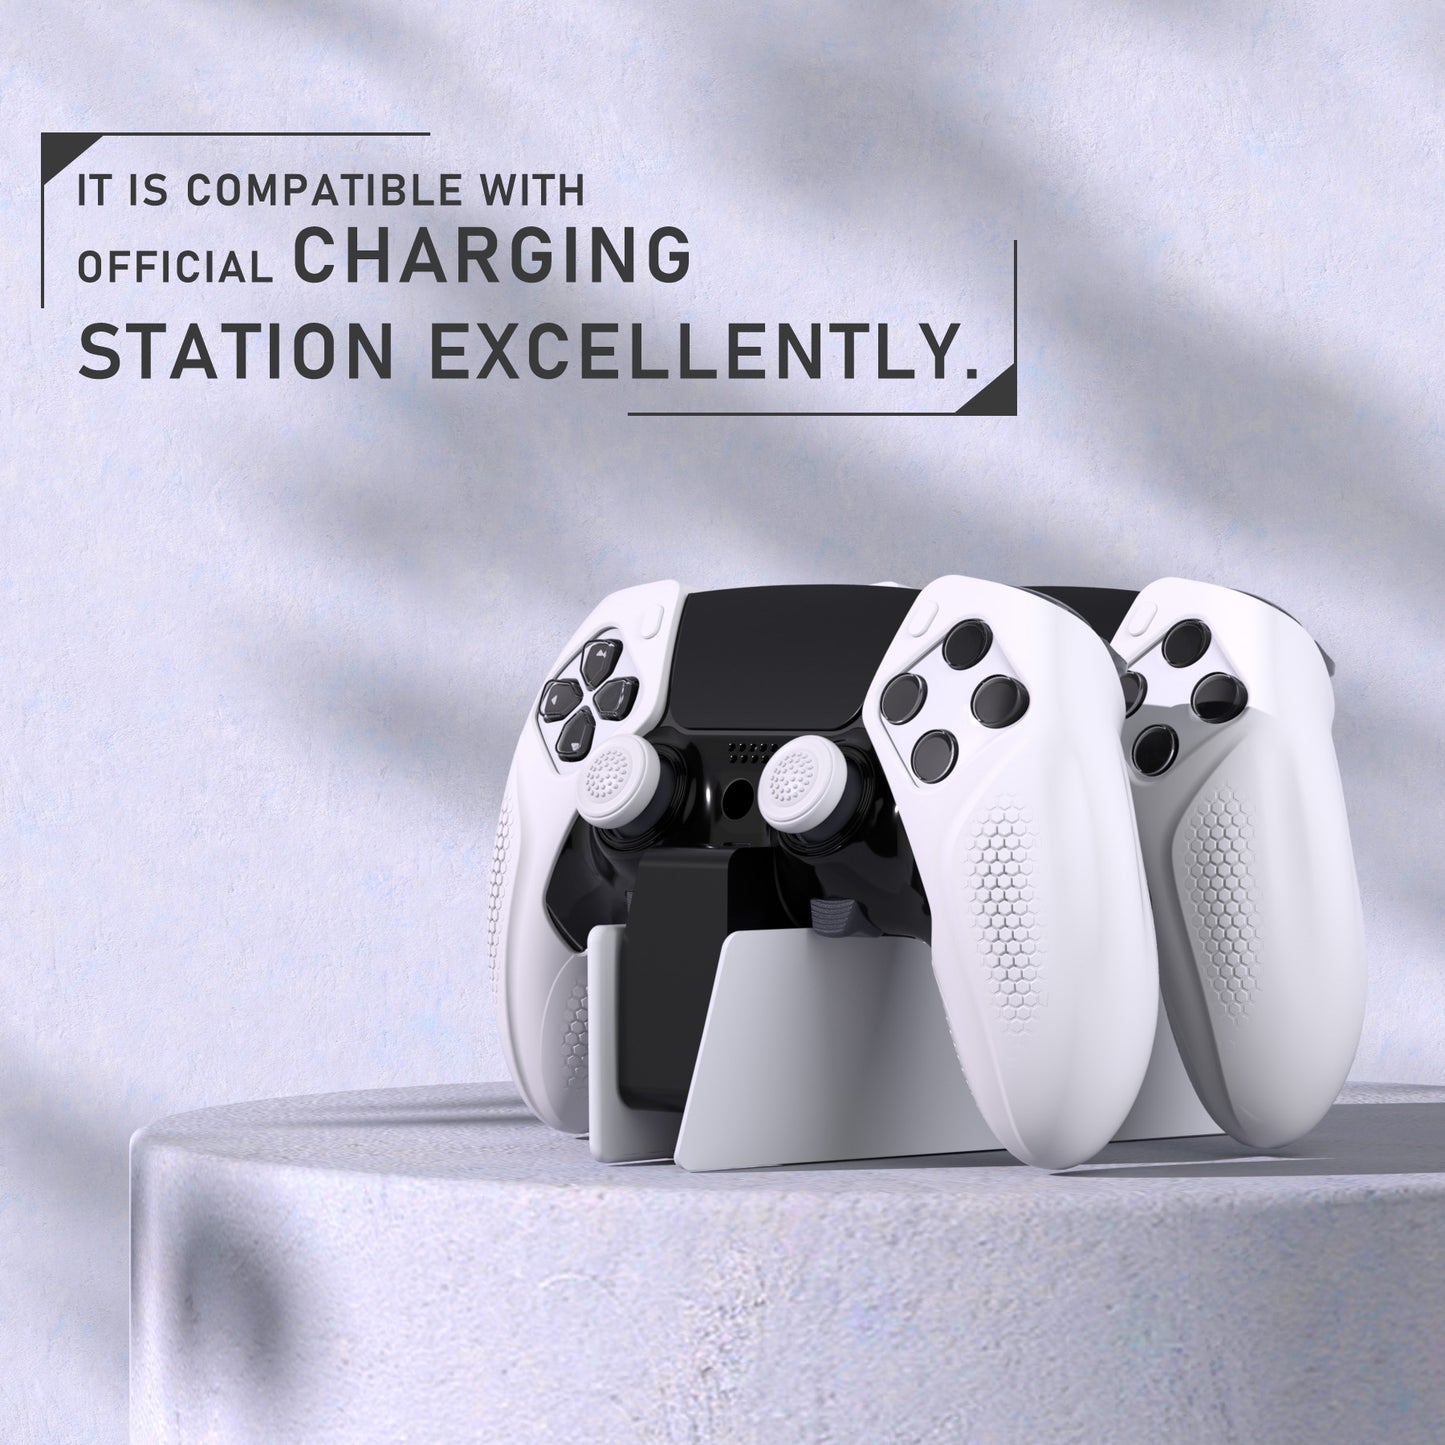 PlayVital Ninja Edition Anti-Slip Half-Covered Silicone Cover Skin with Thumb Grip Caps for PS5 Edge Controller - White - EYPFP002 PlayVital